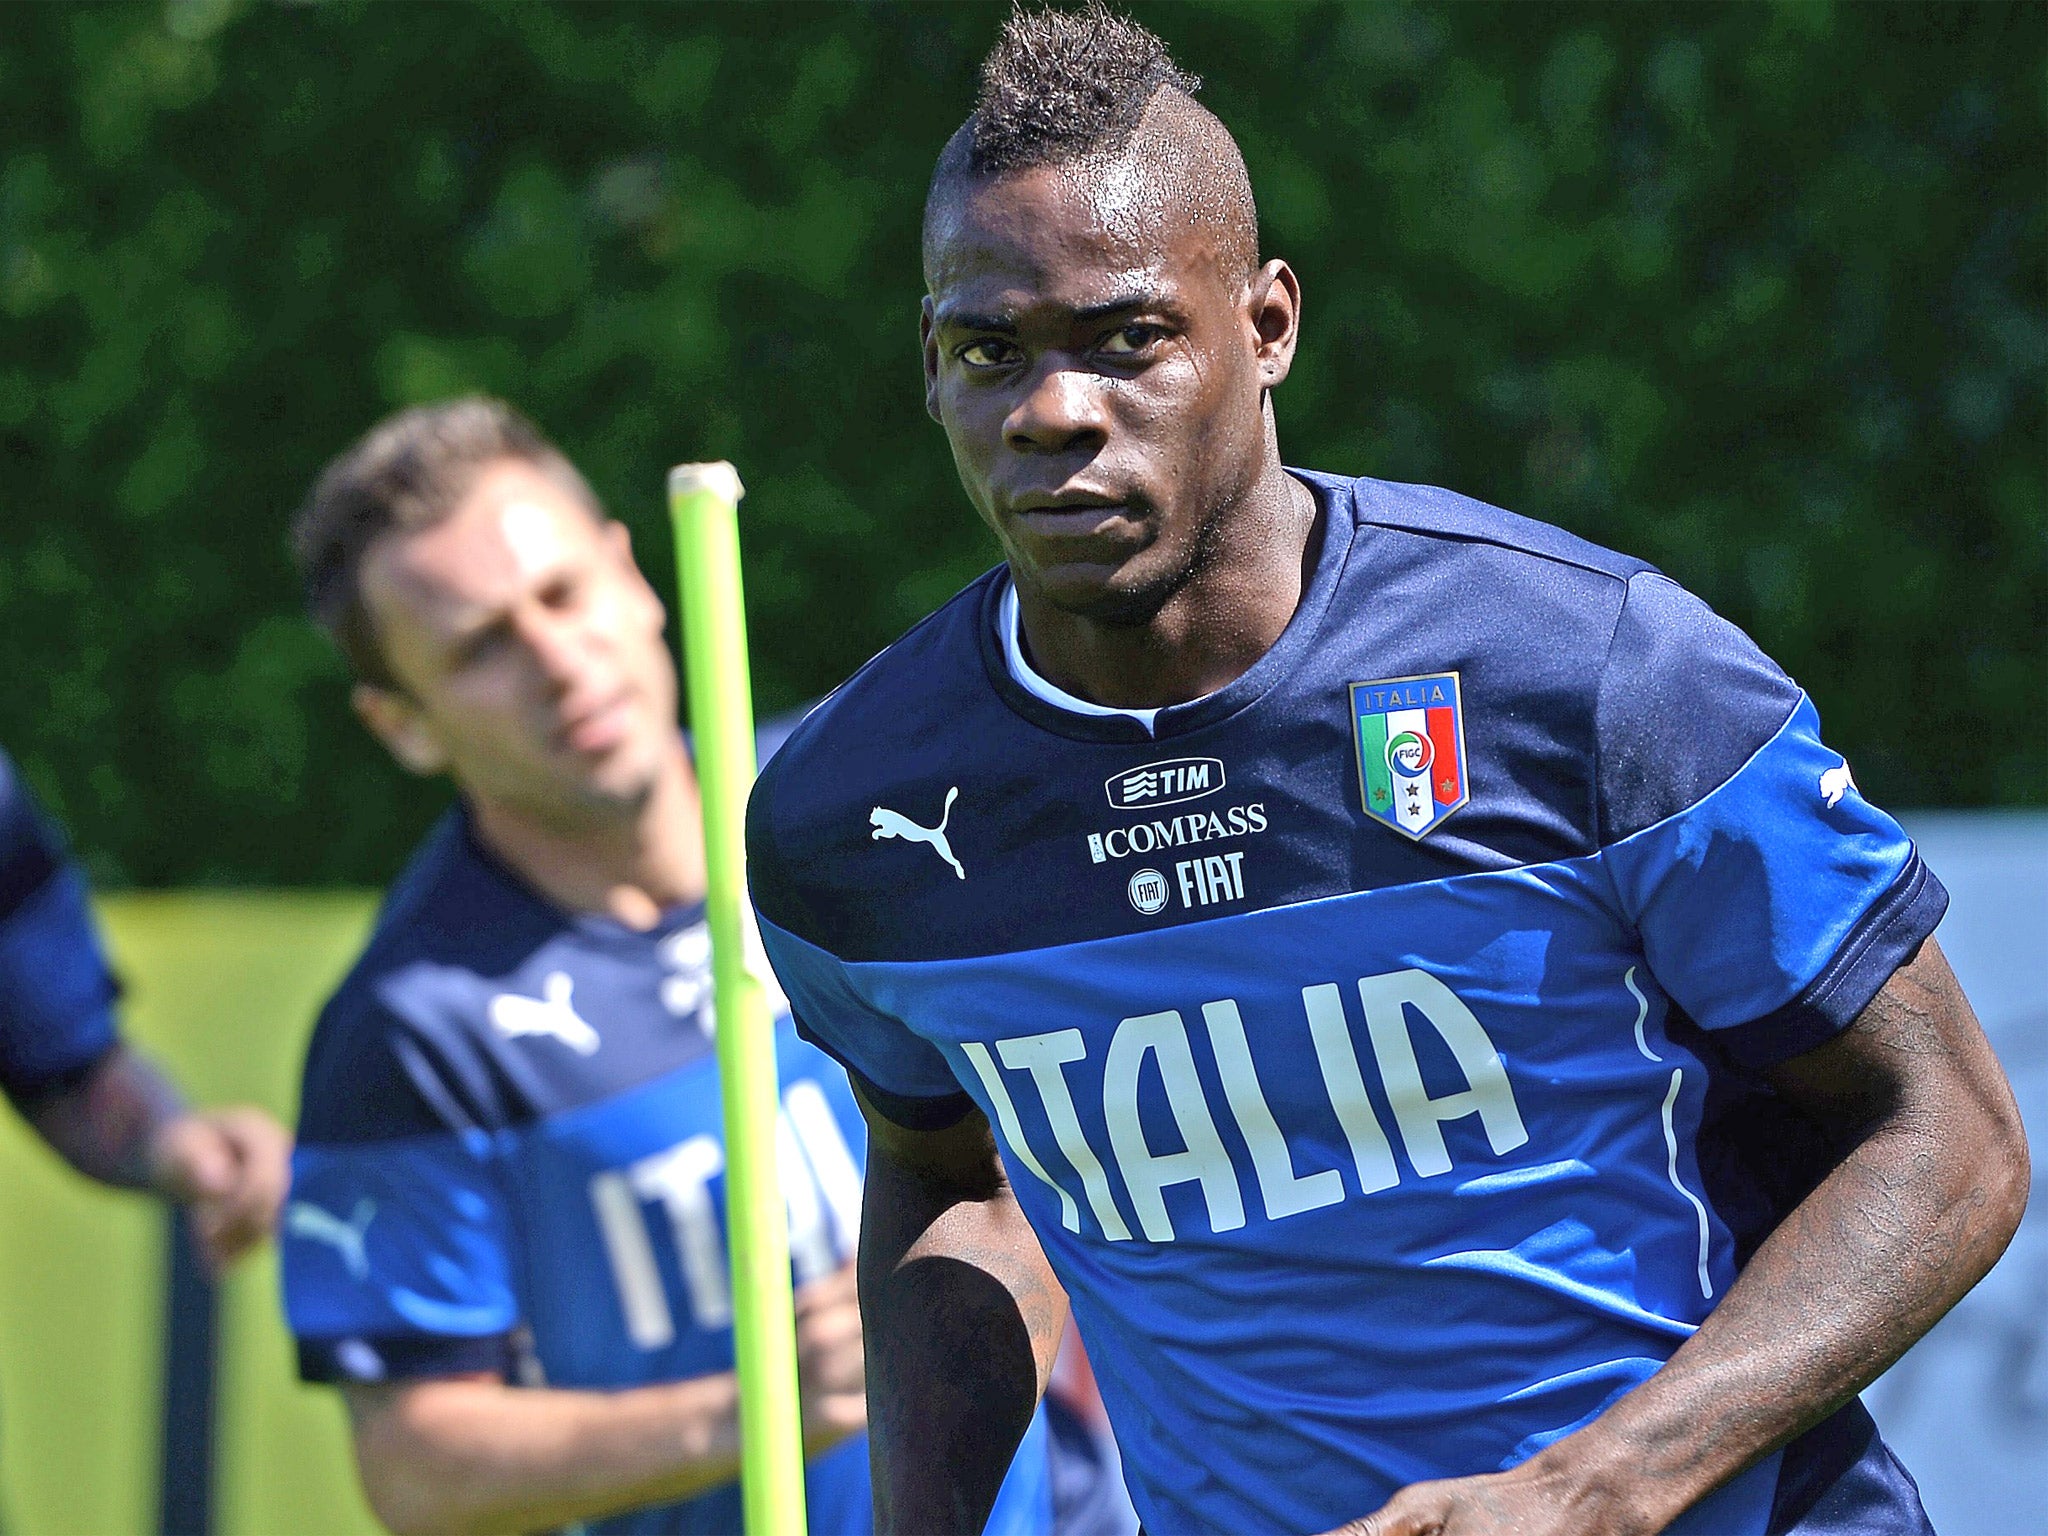 Mario Balotelli (right) did not let the insults get to him, said a team-mate